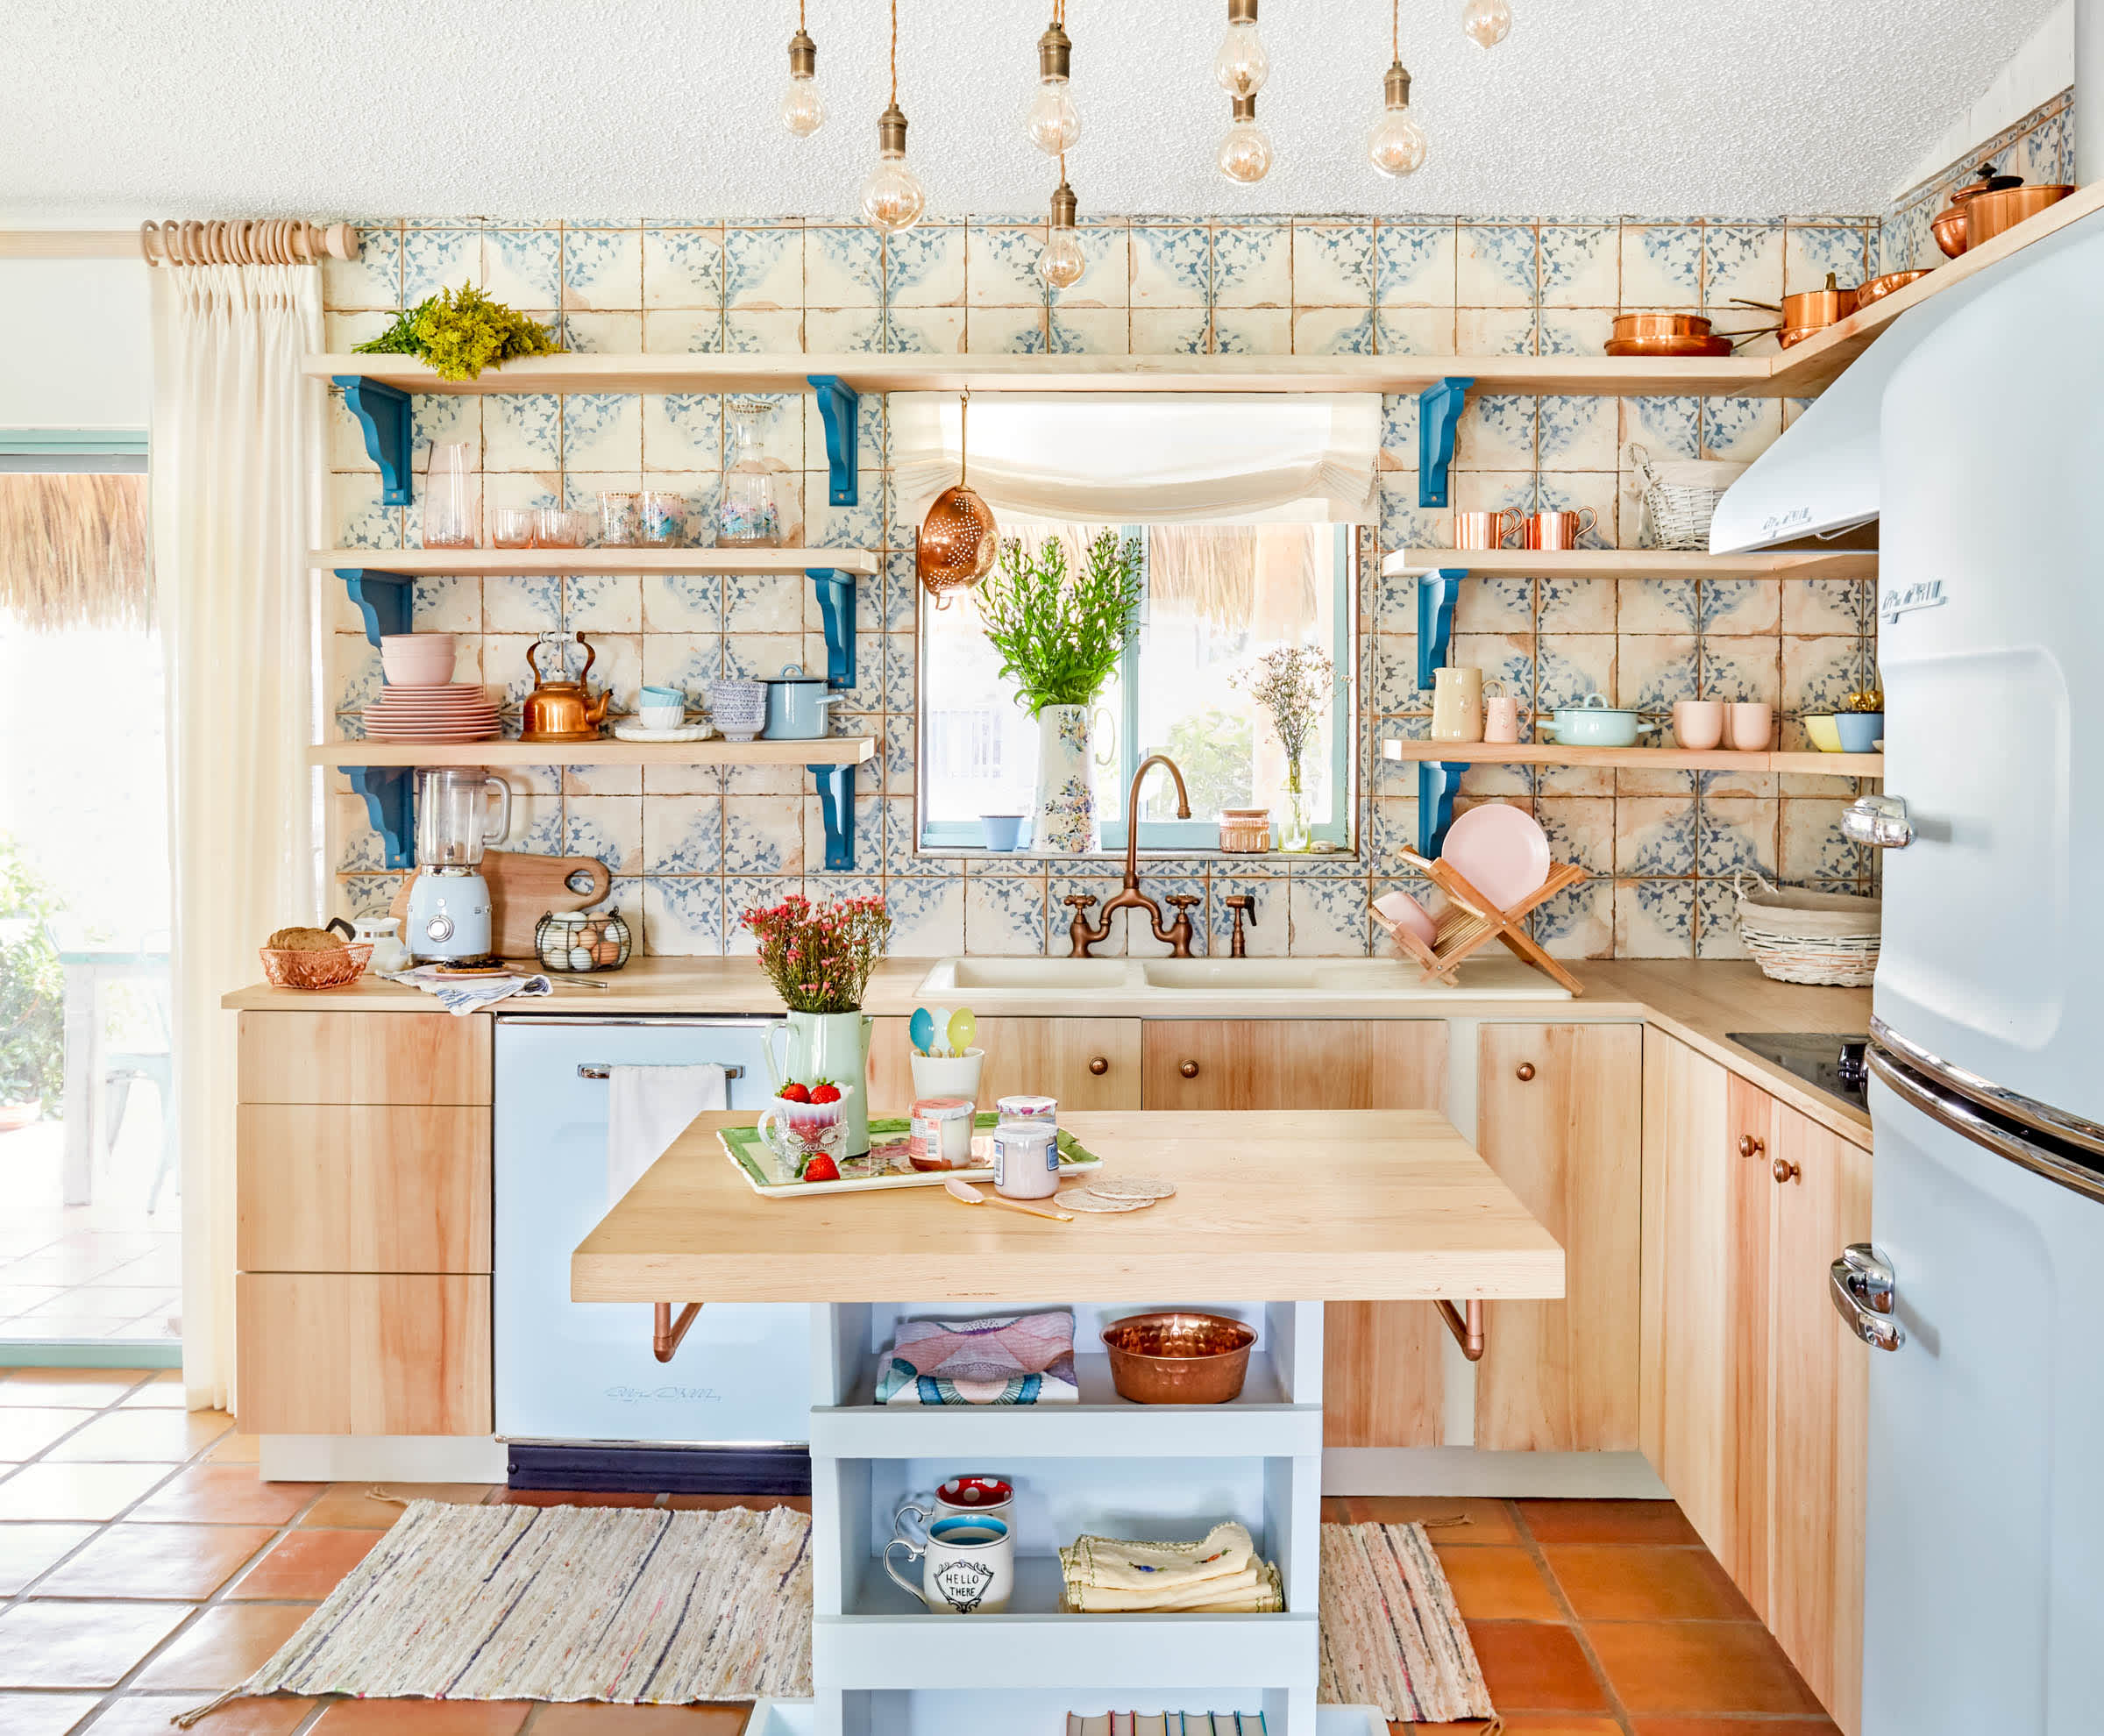 18 Country Kitchen Ideas   How to Give a Rustic Style to Your ...